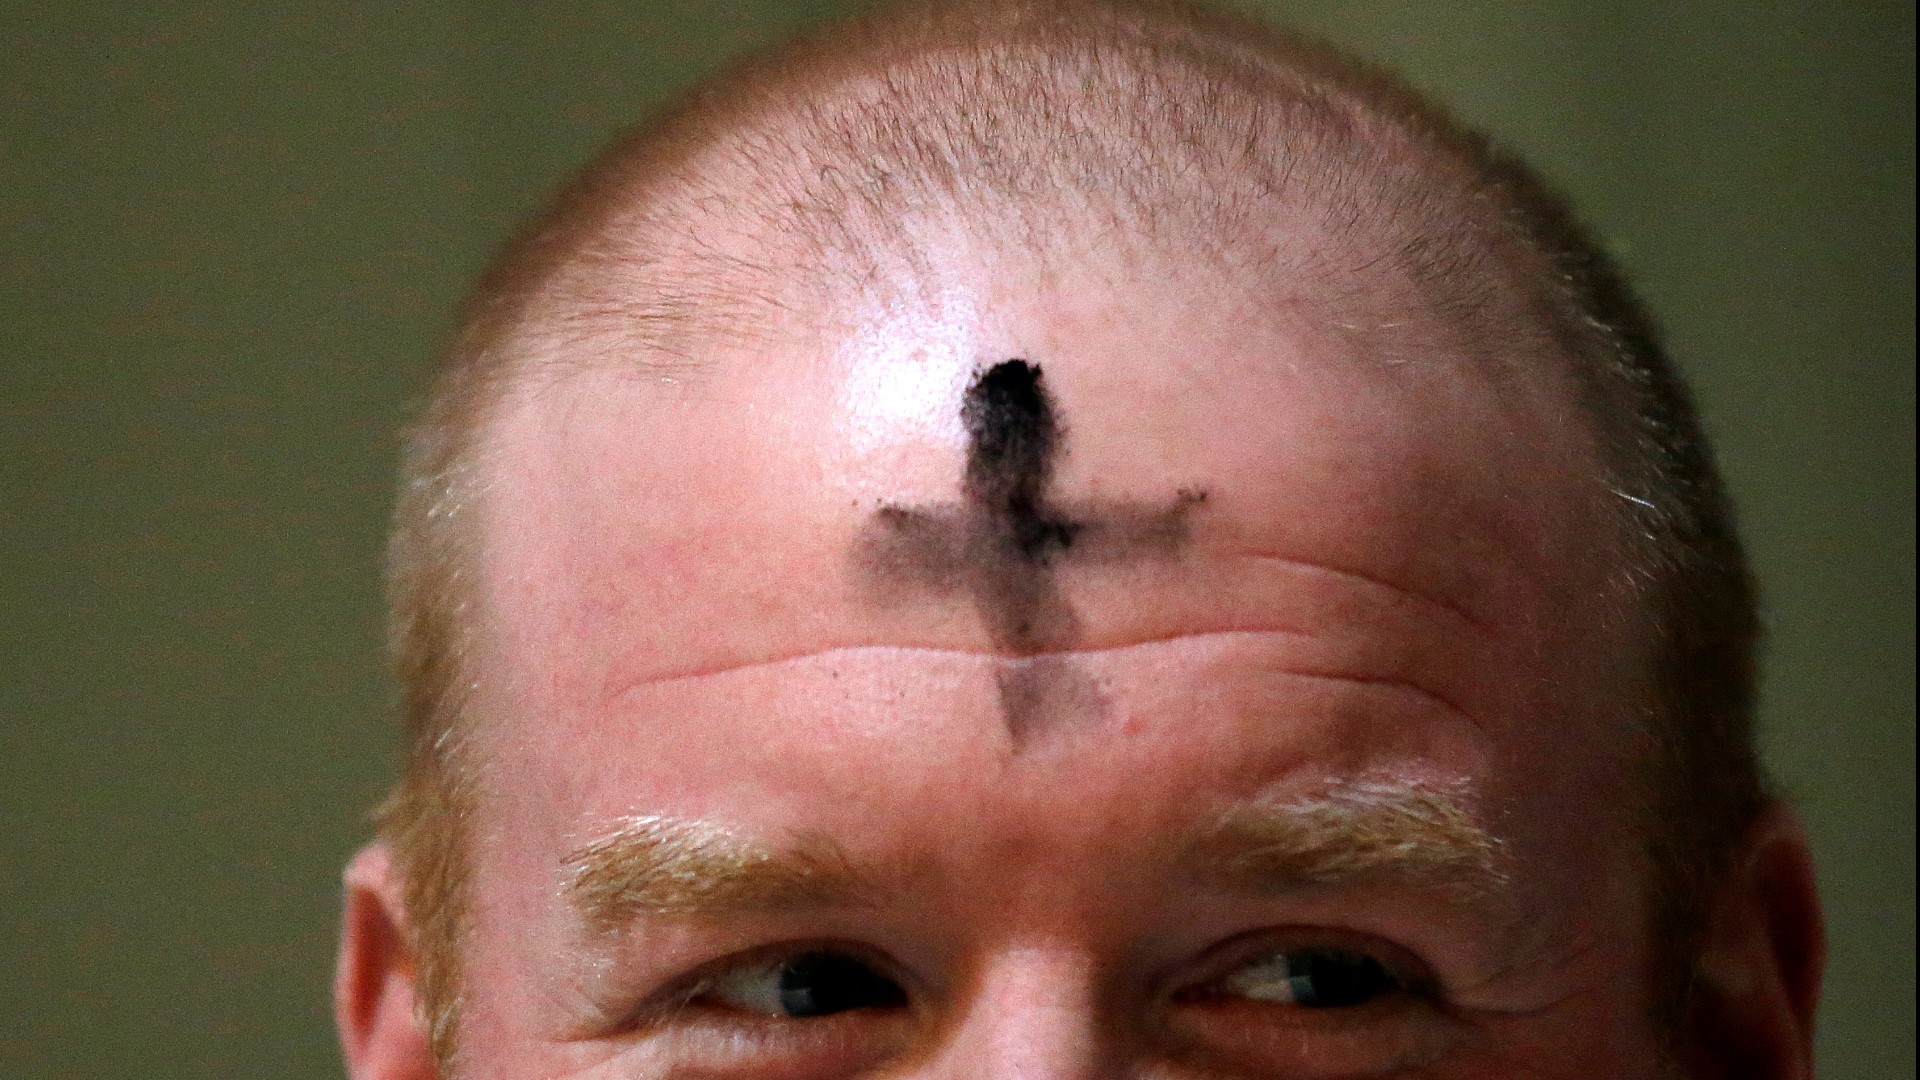 Feb. 17, 2021: Marking the start of Lent will look a bit different this year as the Catholic Diocese of Cleveland adjusts how they're conducting Ash Wednesday.